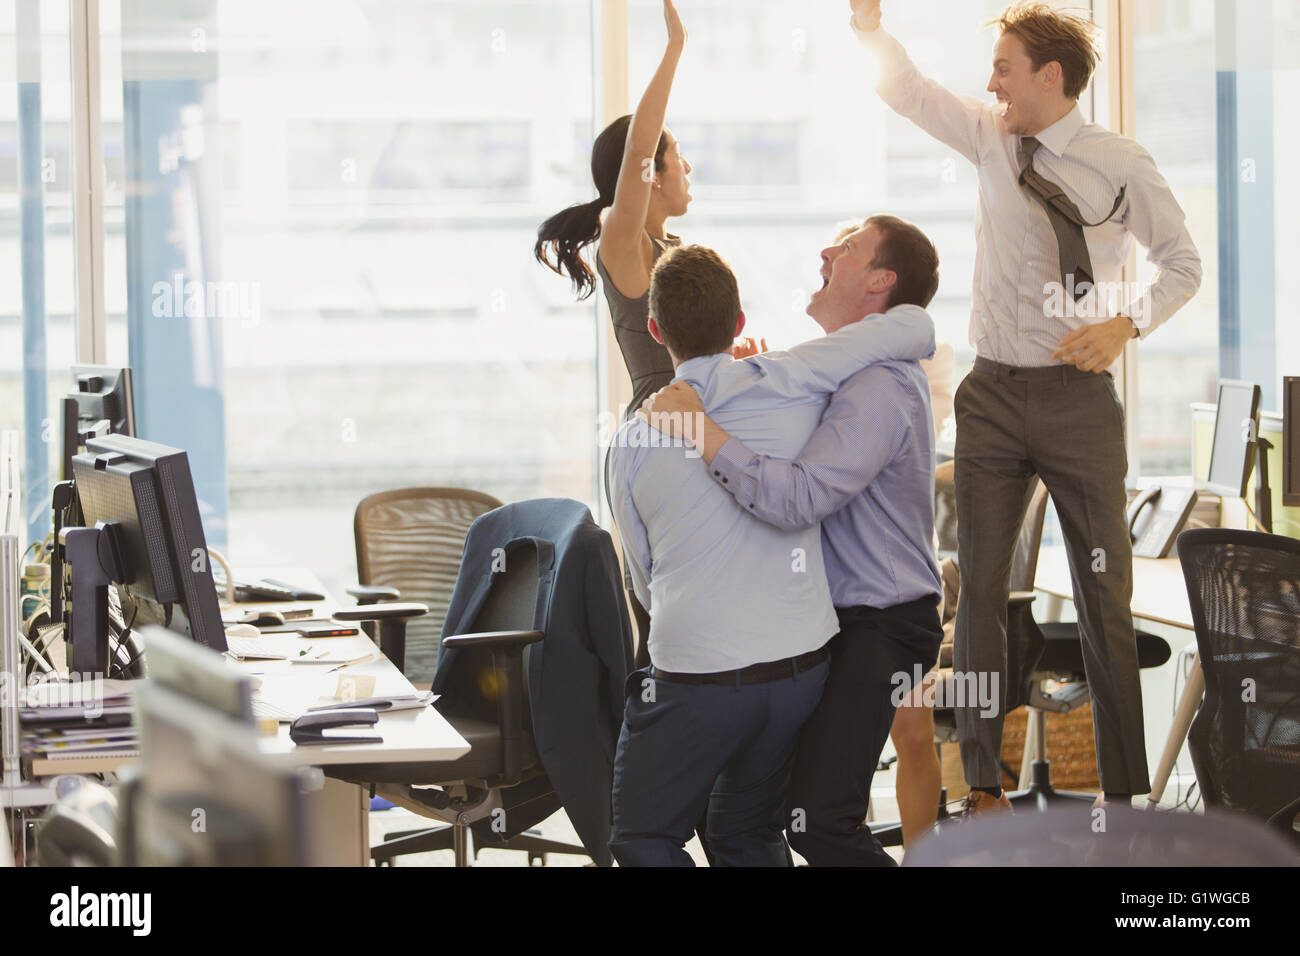 Exuberant business people celebrating and jumping in office Stock Photo